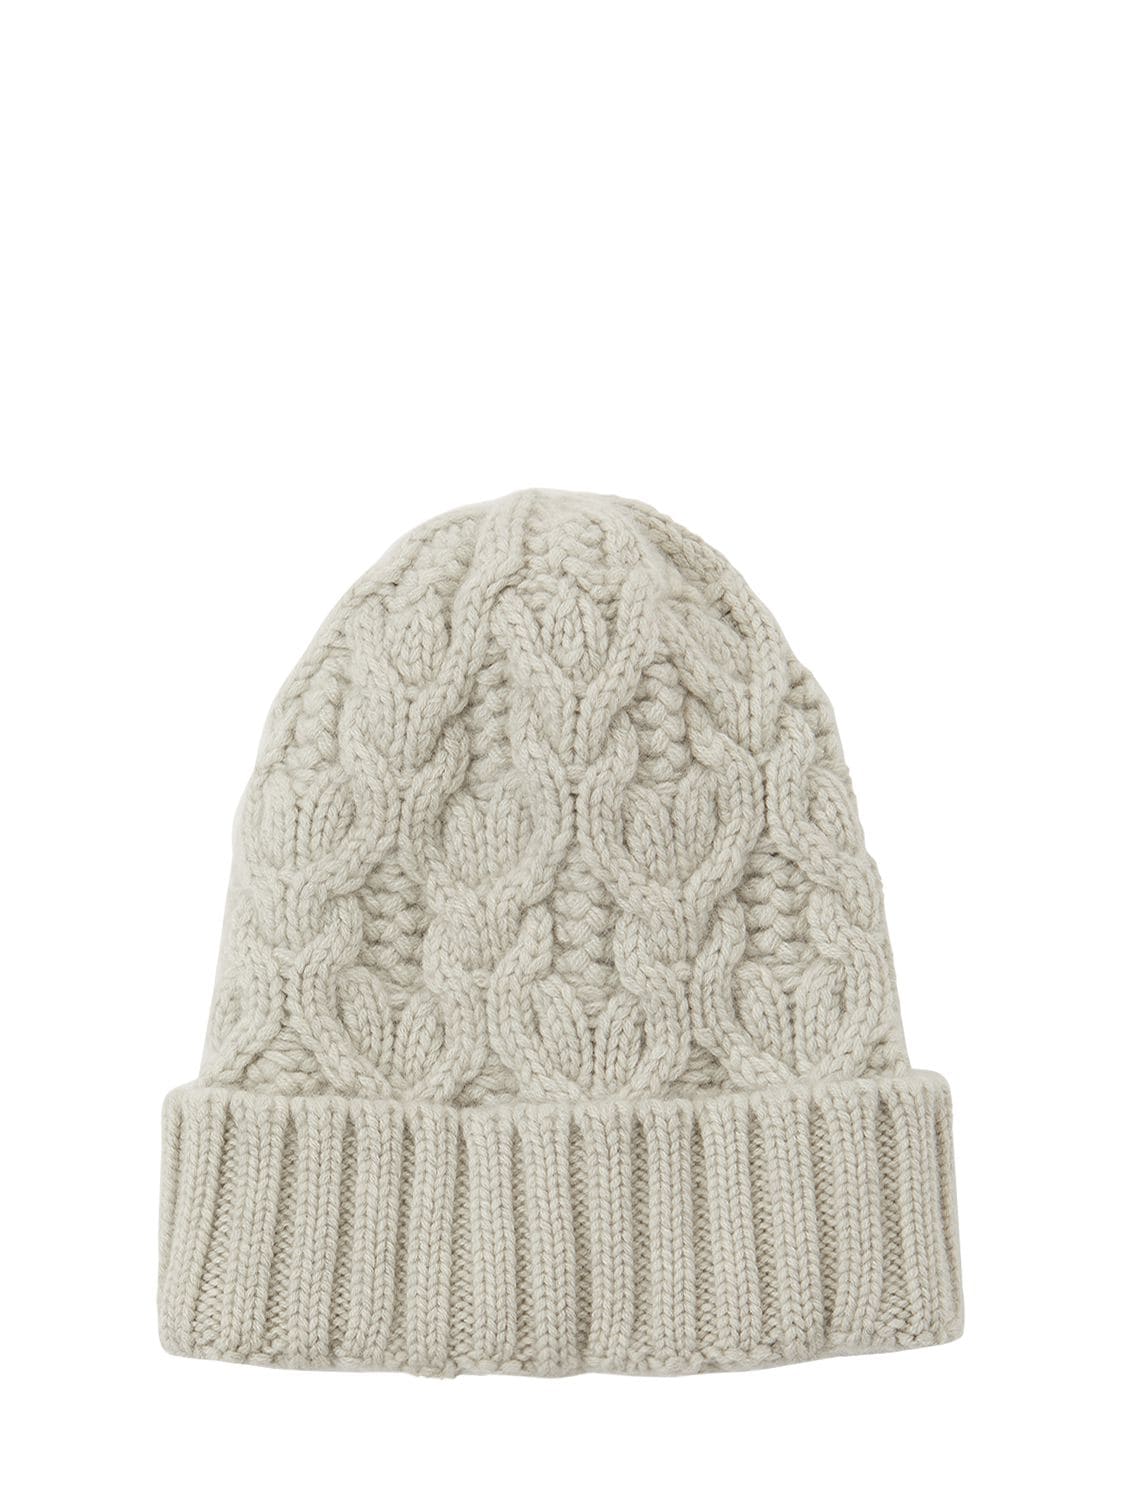 Penhill Baby Cashmere Knit Beanie